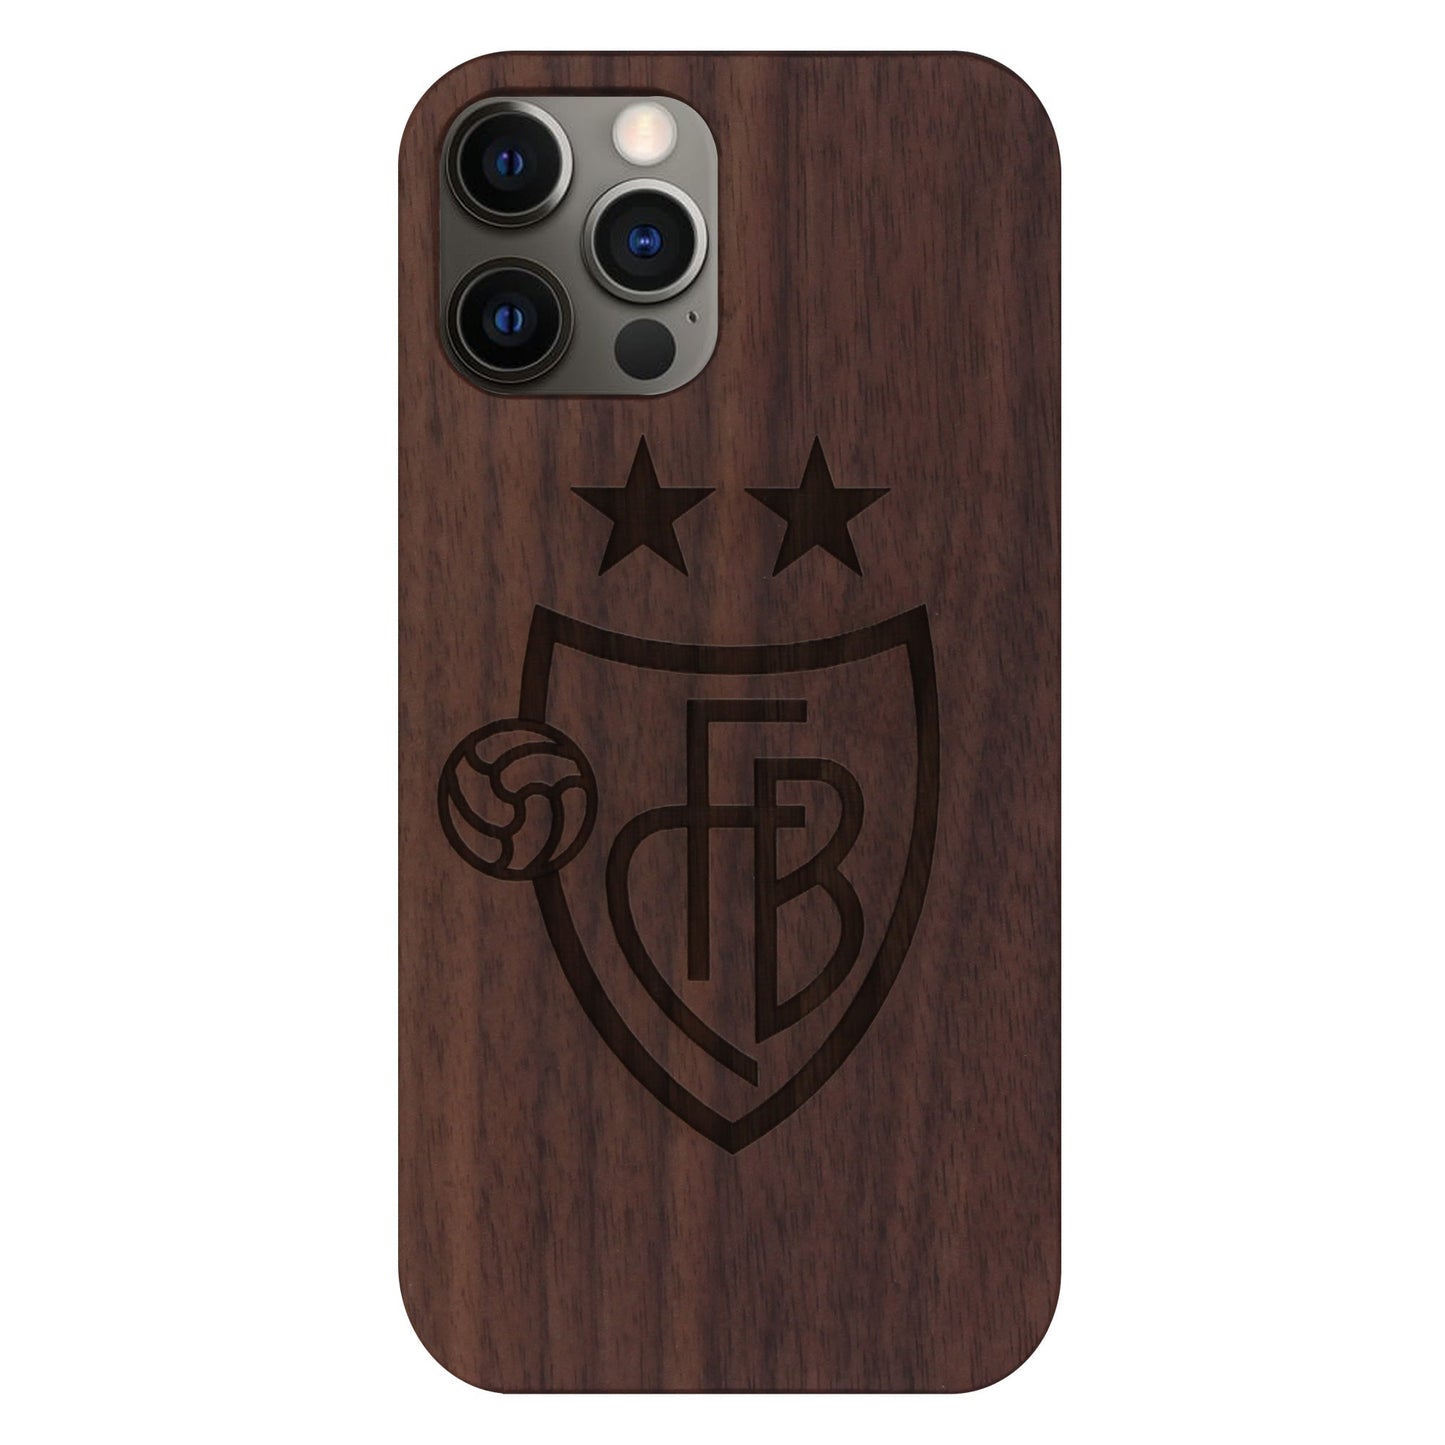 FCB Eden case made of walnut wood for iPhone 12 Pro Max